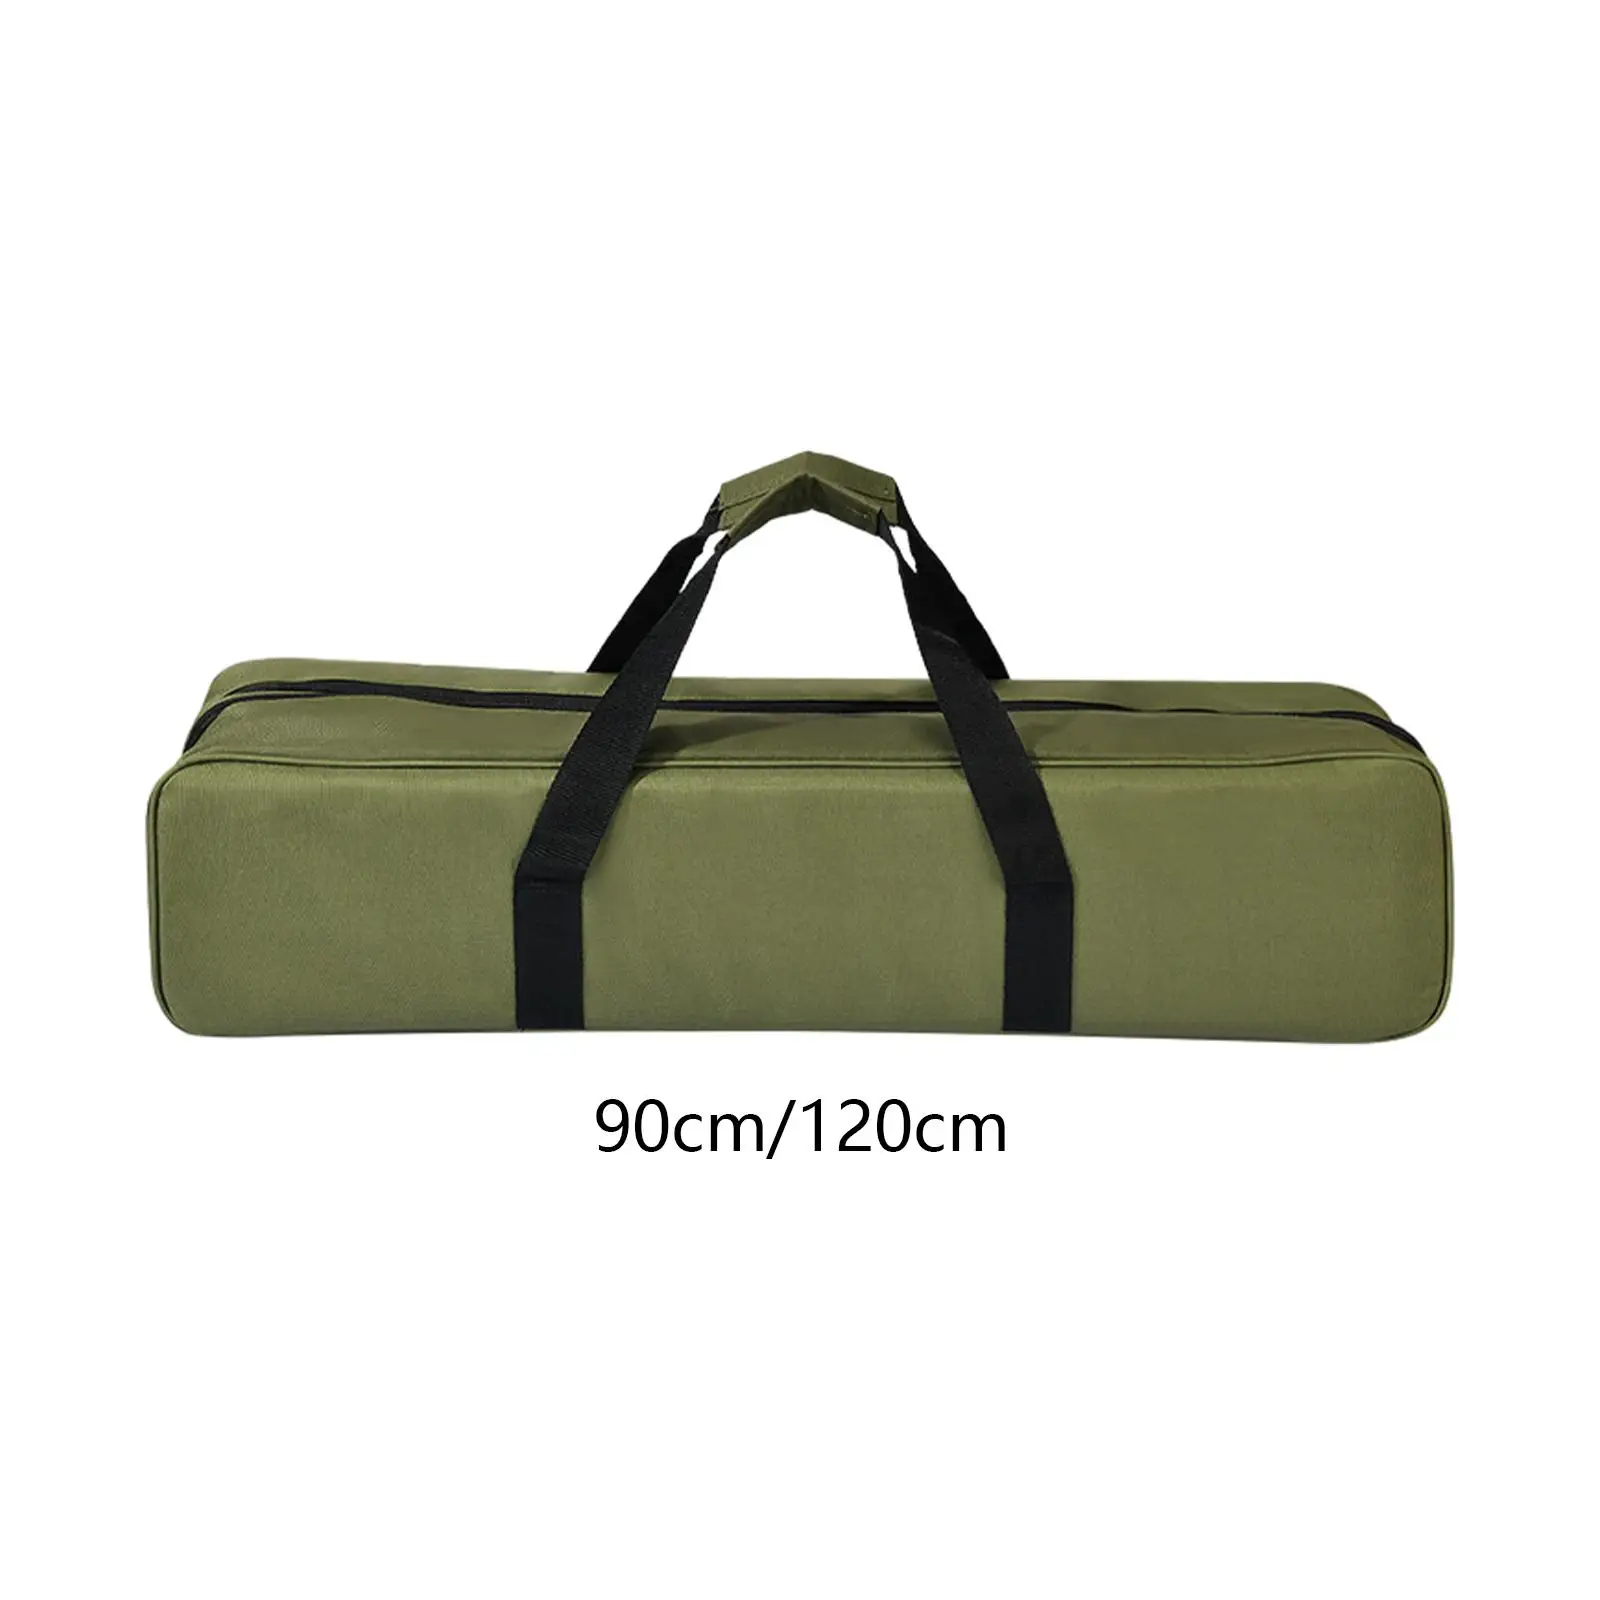 Camping Storage Bag Carry Handles Storage Container Zipper Carrying Bag for Travel Canopy Pole Fishing Camping Trekking Pole